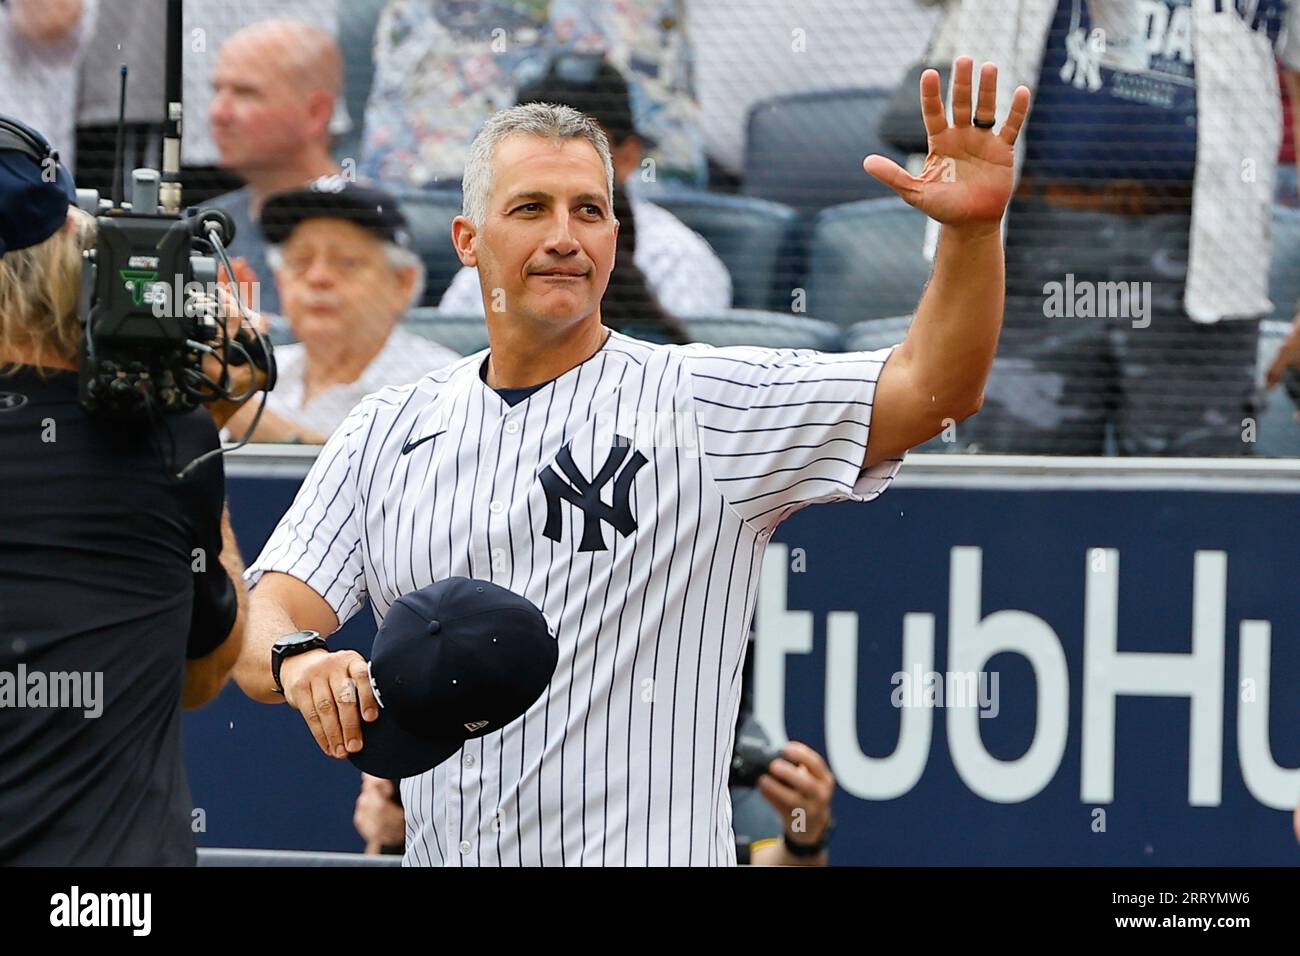 BRONX, NY - SEPTEMBER 09: Andy Pettitte is introduced during the